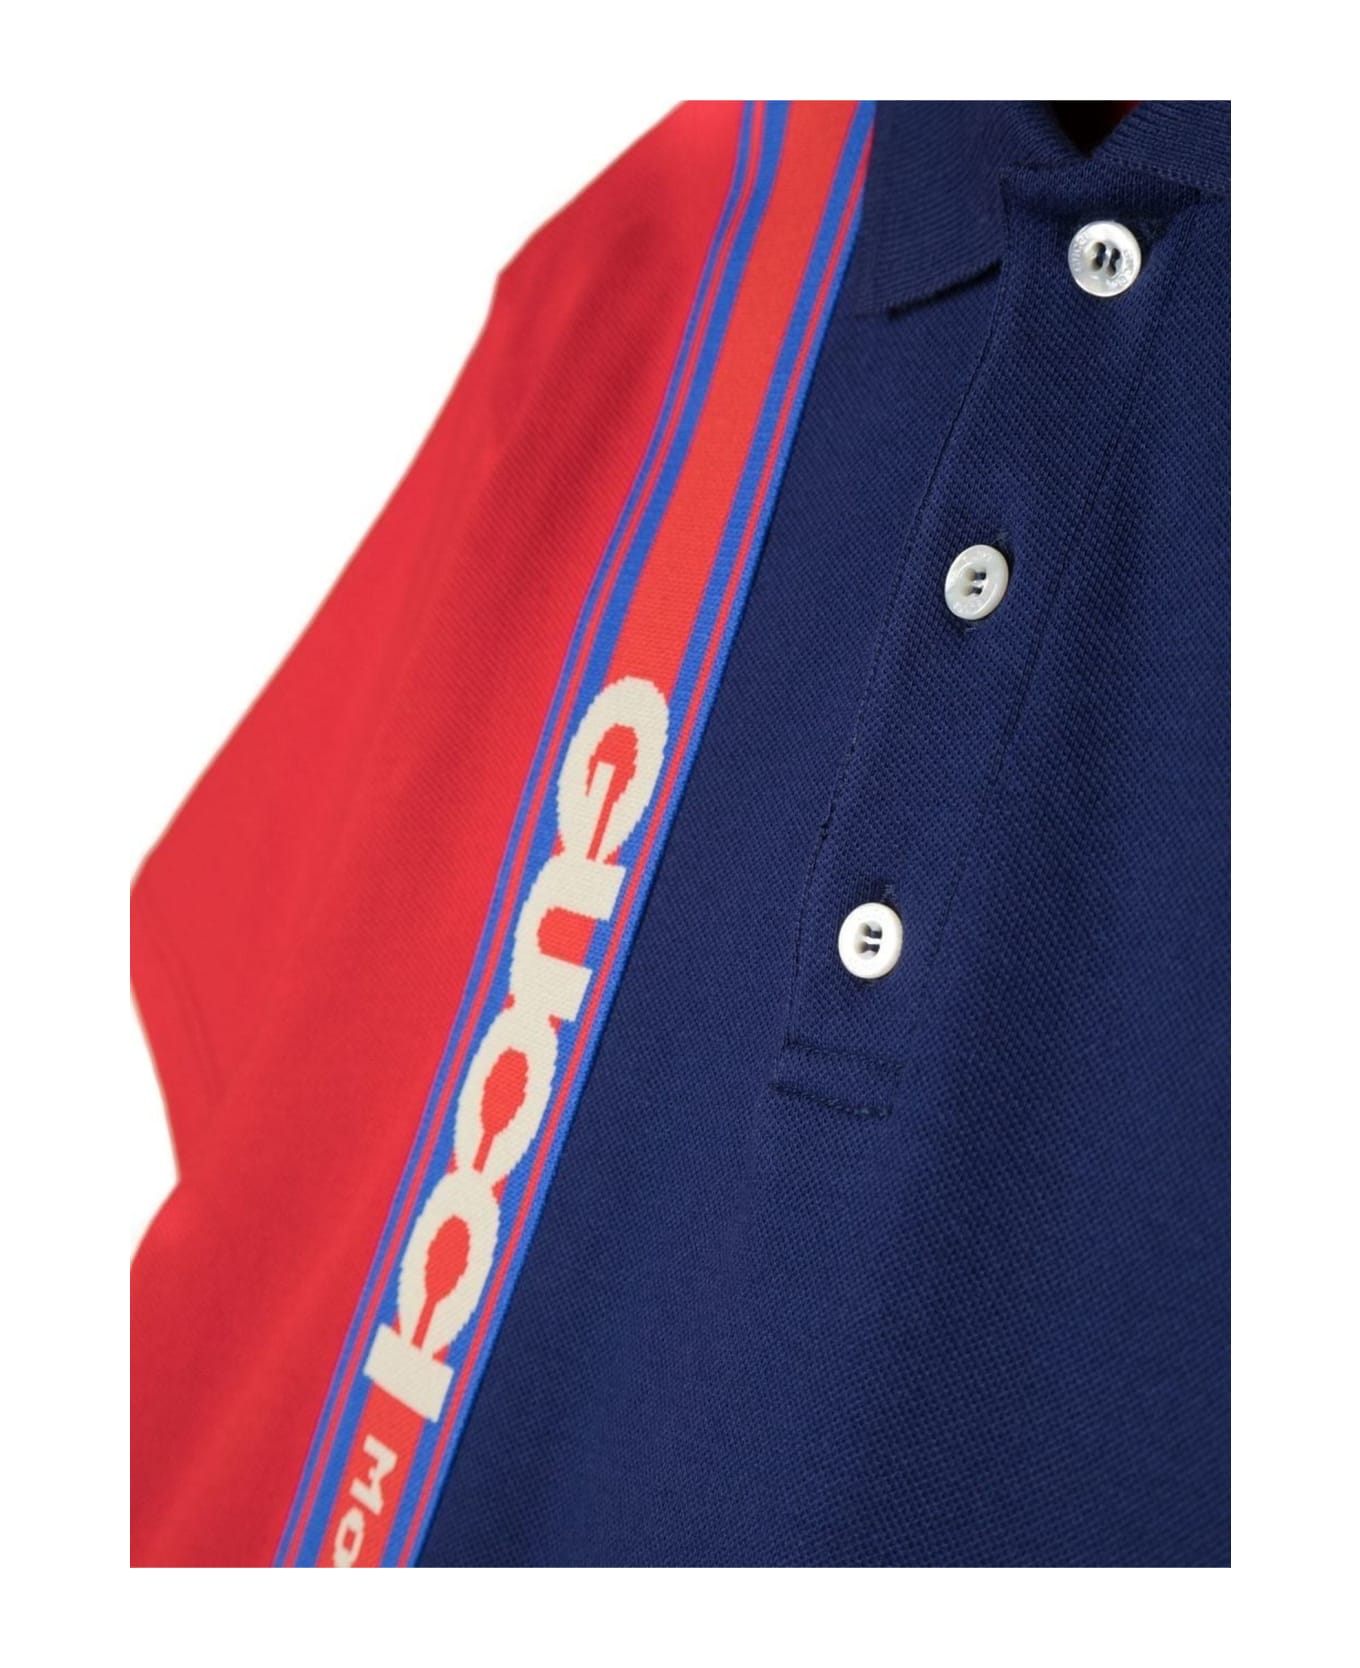 Gucci Blue And Red Cotton Polo Shirt - Blu